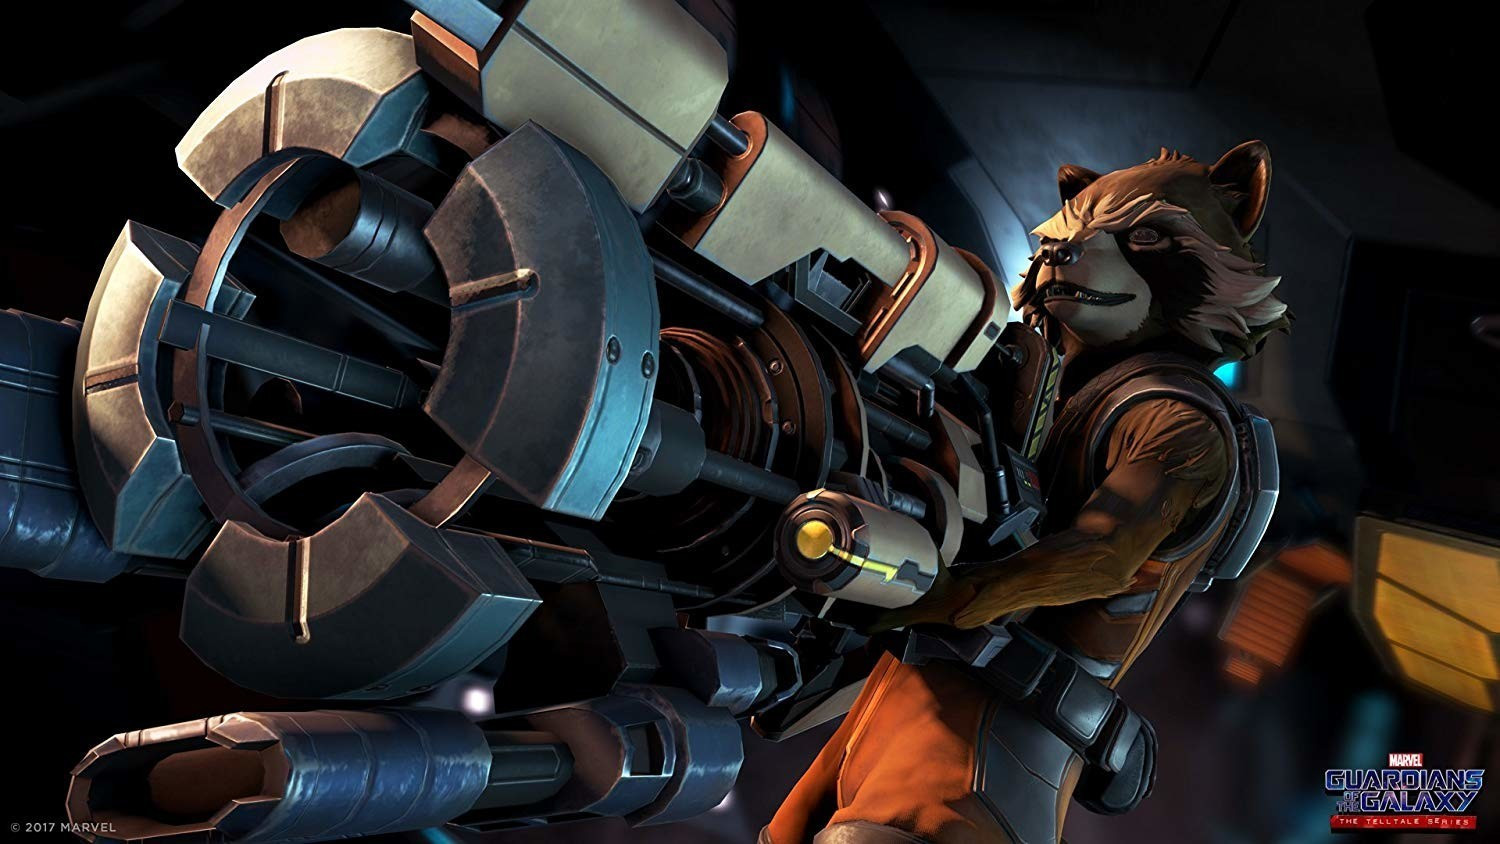 download telltale guardians of the galaxy ps4 for free